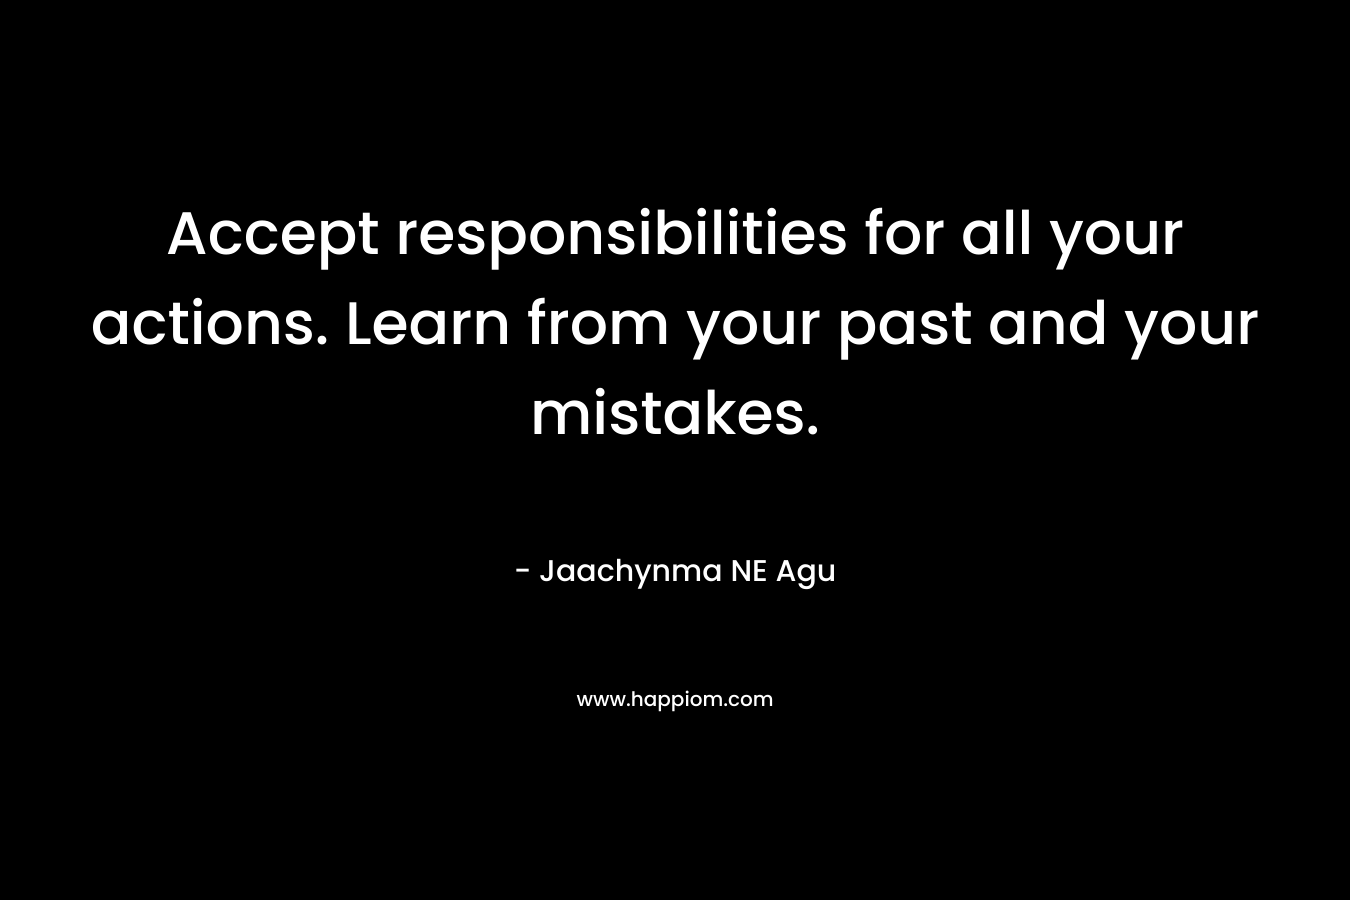 Accept responsibilities for all your actions. Learn from your past and your mistakes.